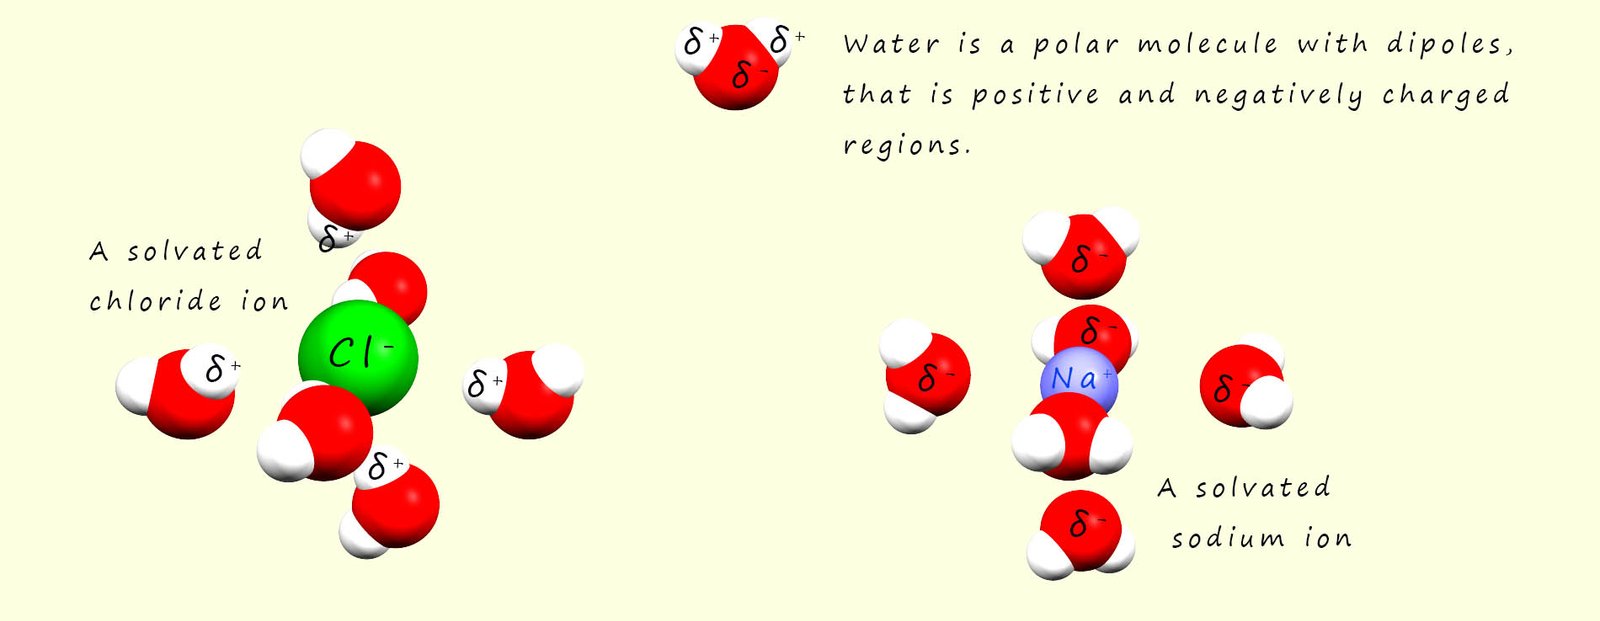 solavtion spheres for sodium and chloride ions in a sodium chloride solution